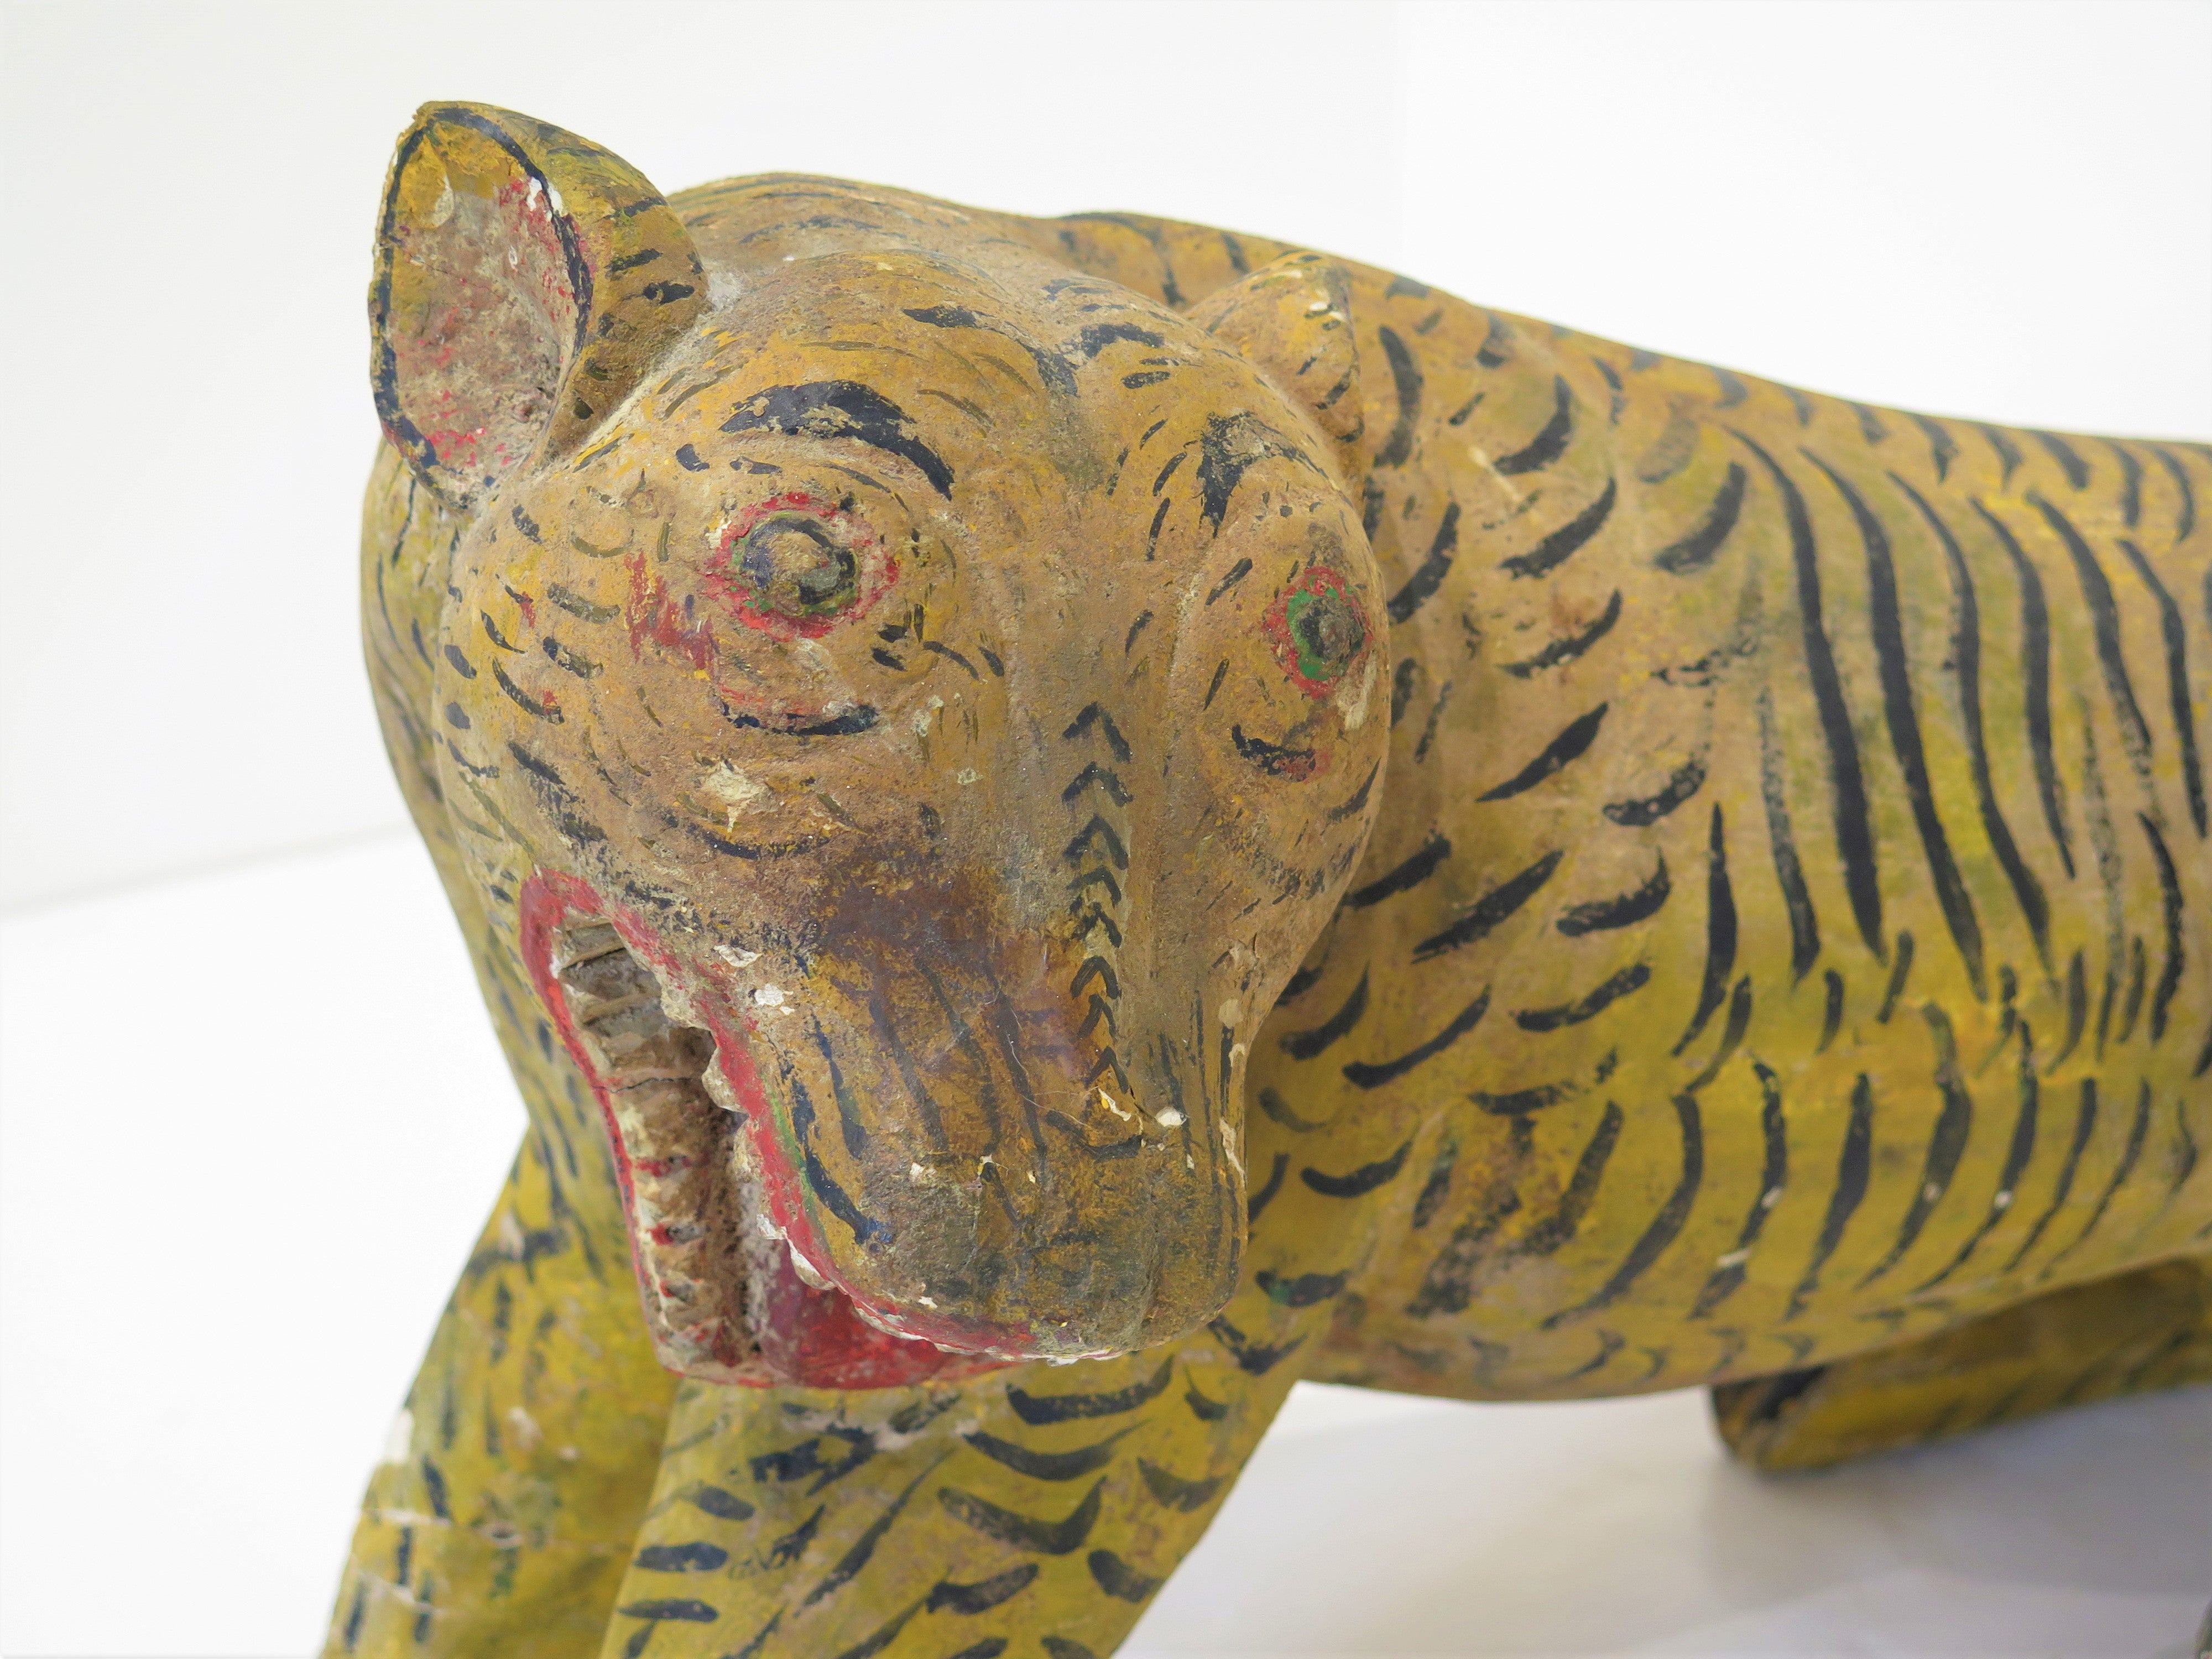 Carved and Painted Tiger with Original Paint